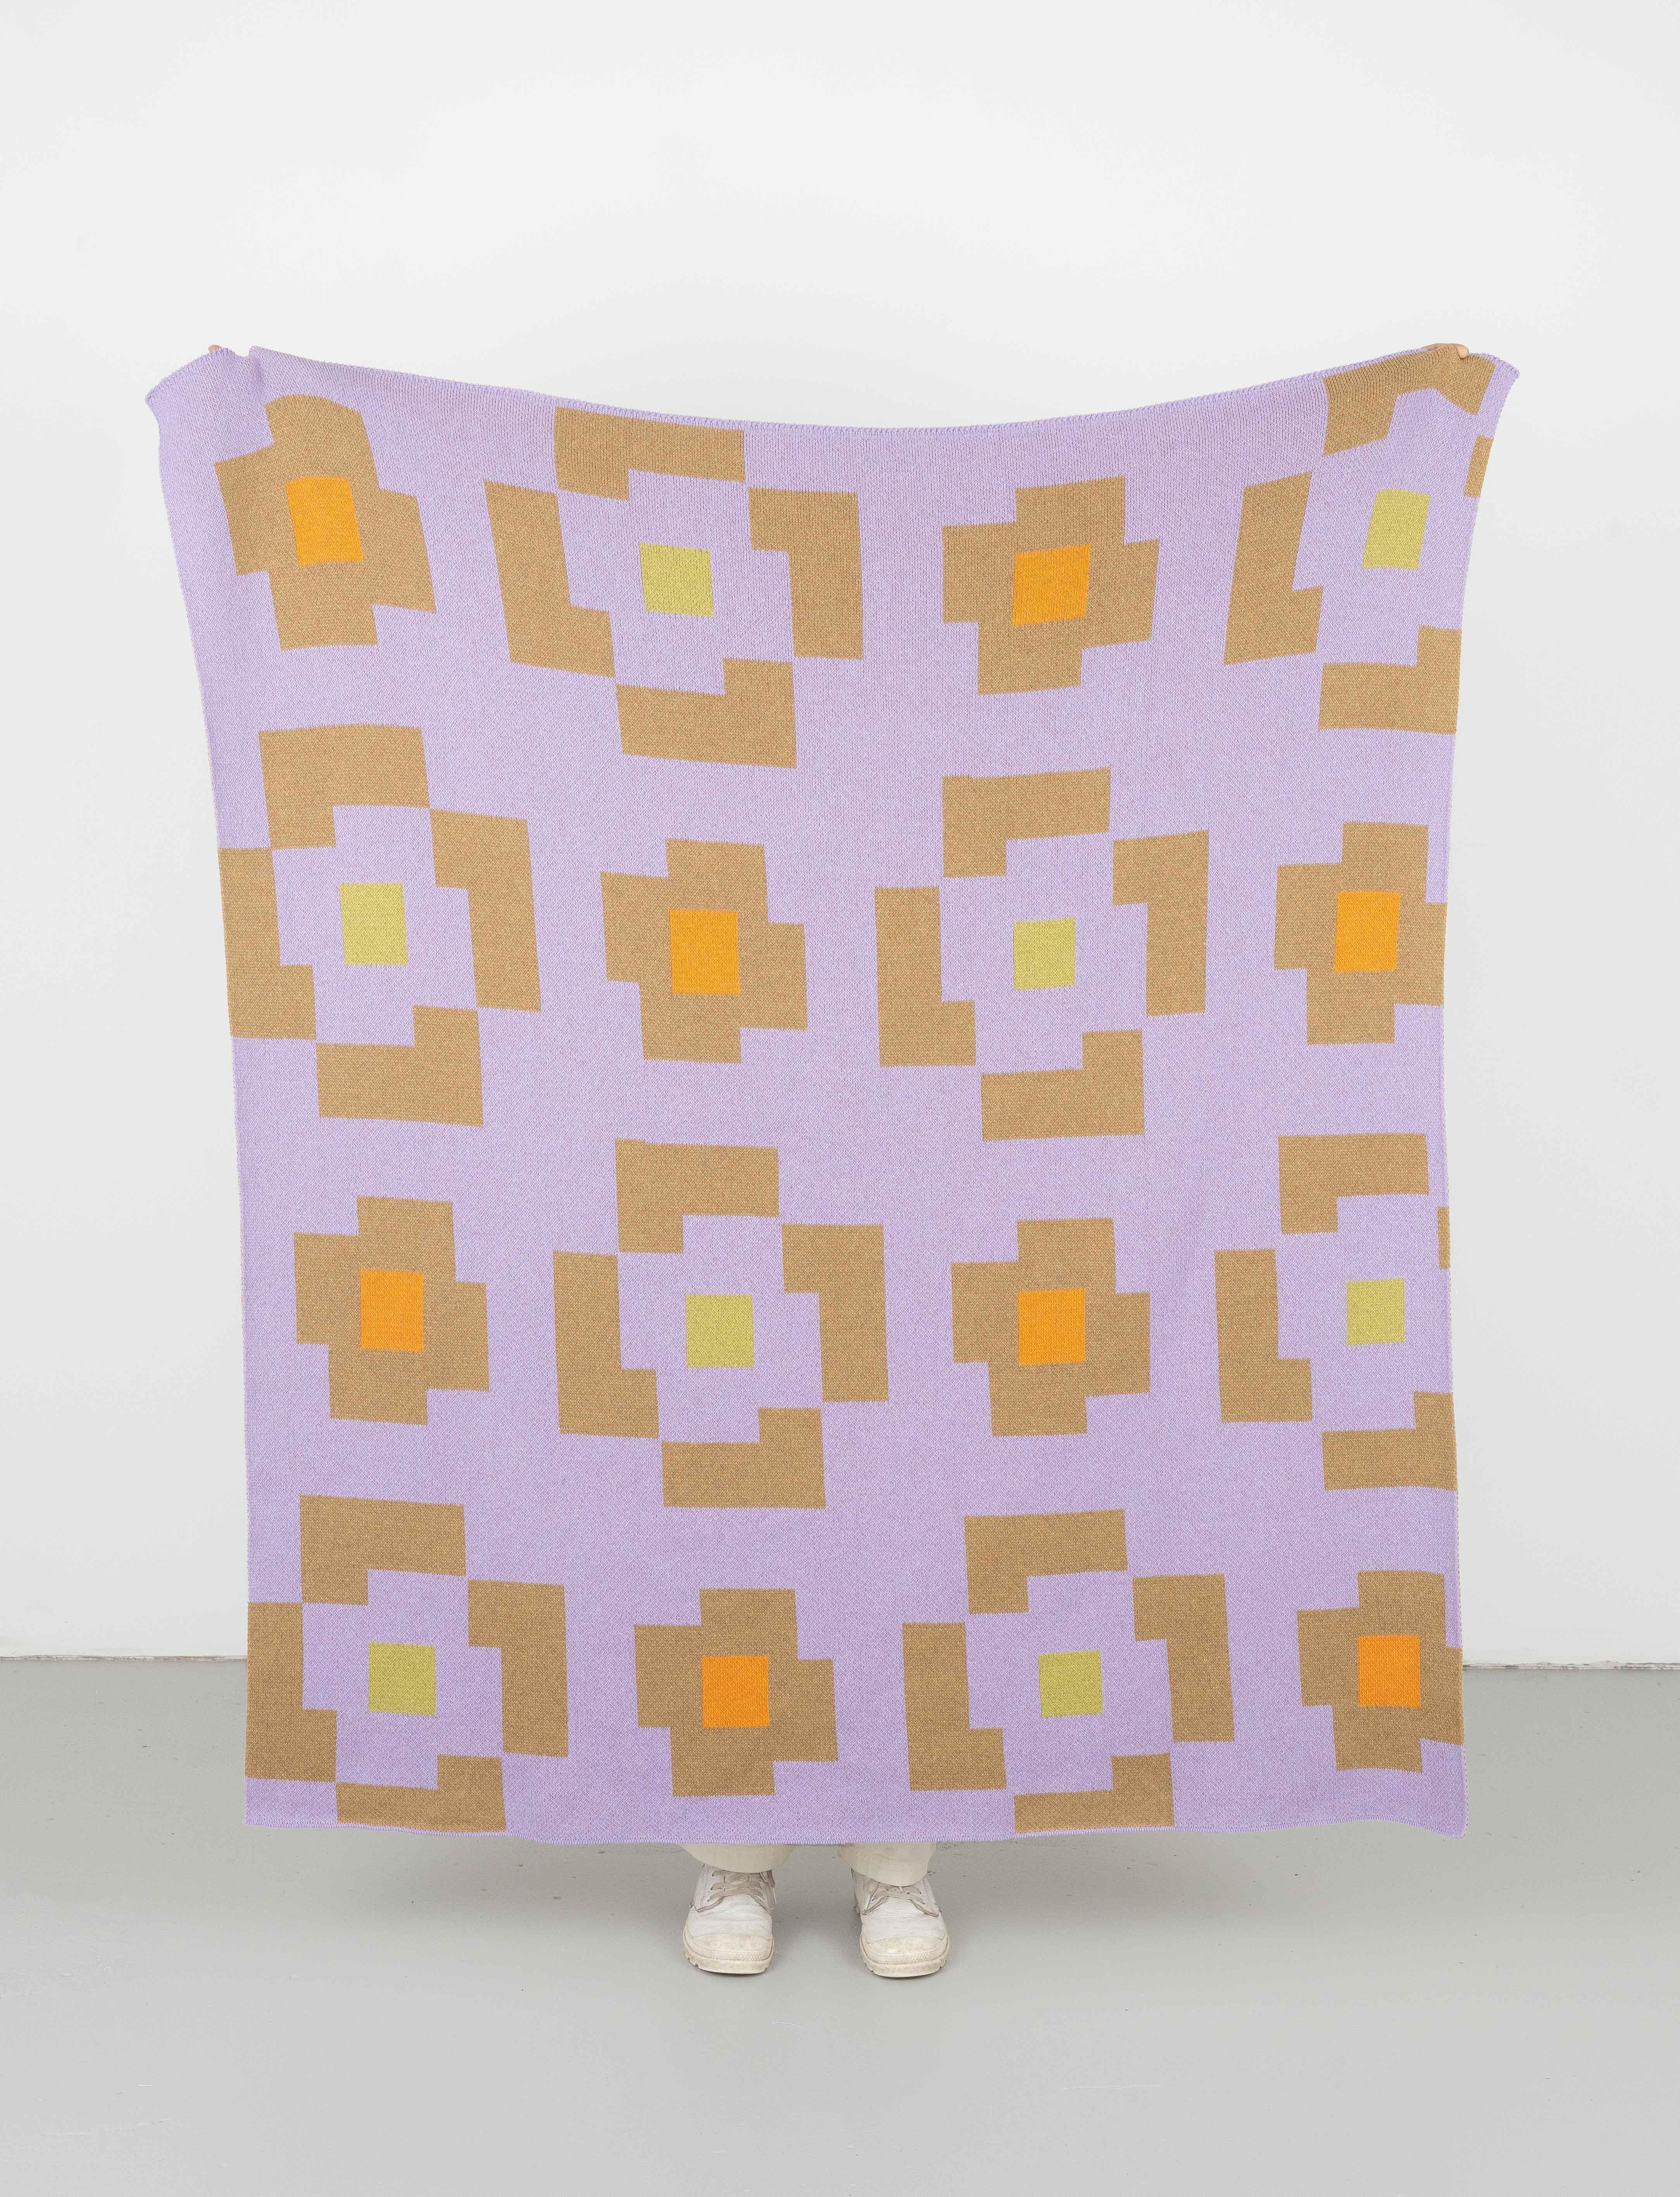 Flower Throw comes in three punchy colorways with a design inspired by early 19th century Overshot Novelty weave patterns.

Knit with 100% upcycled and recycled materials. With a heavier weight and softer hand than our woven throws, the drape and